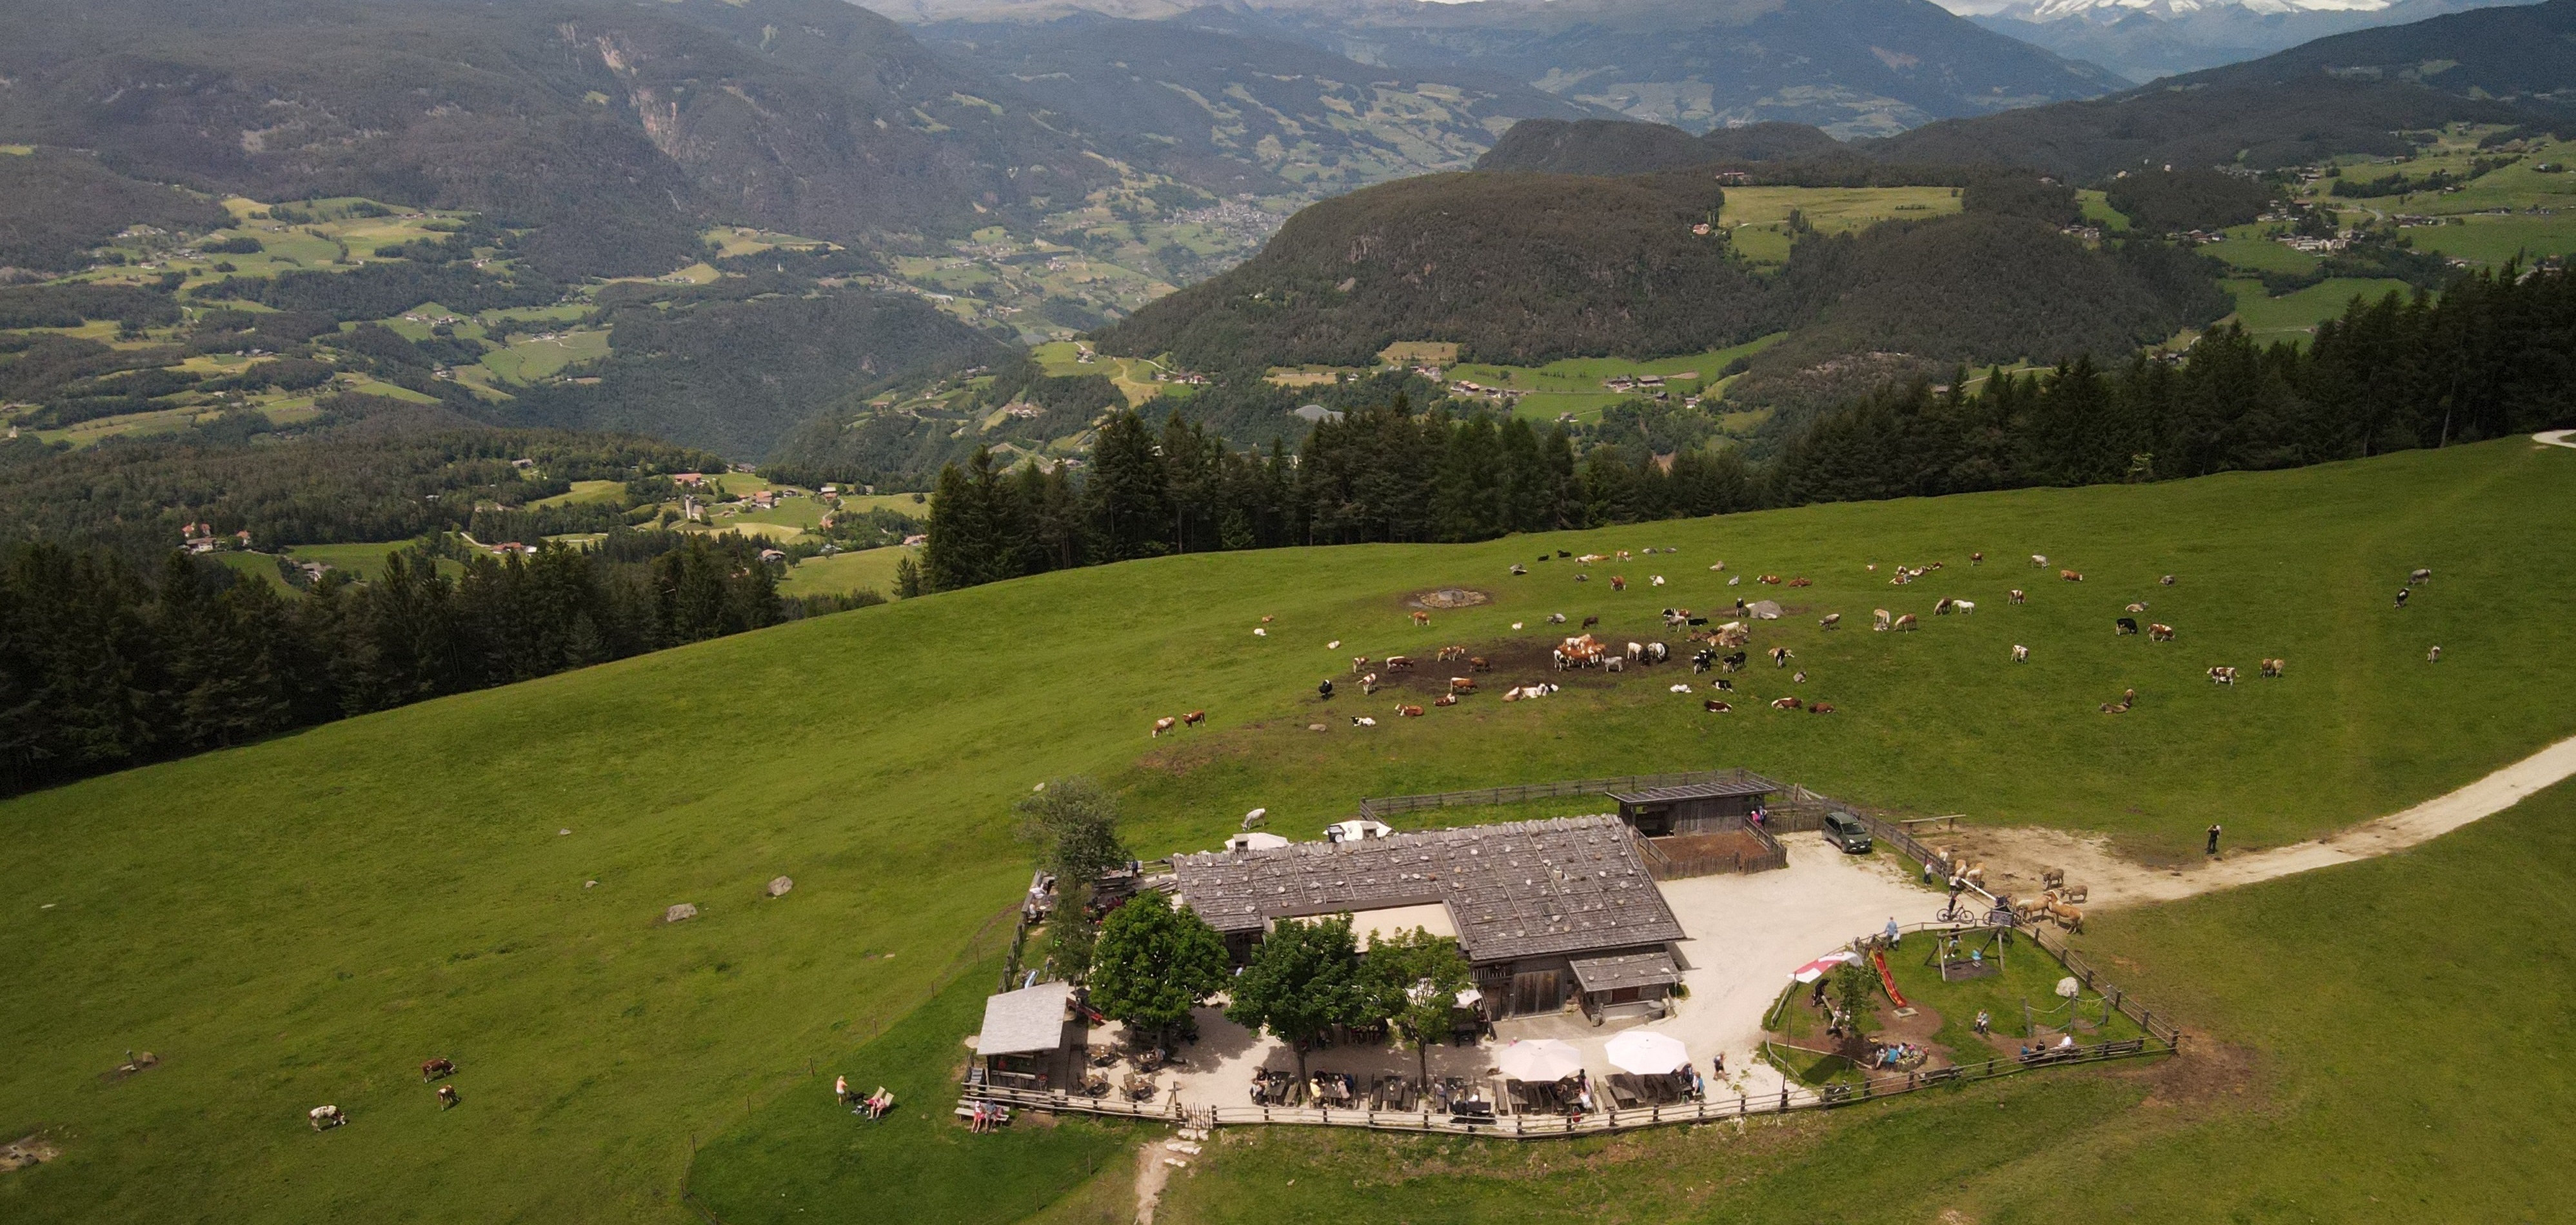 Exploring a mountain meadow in South Tyrol from above